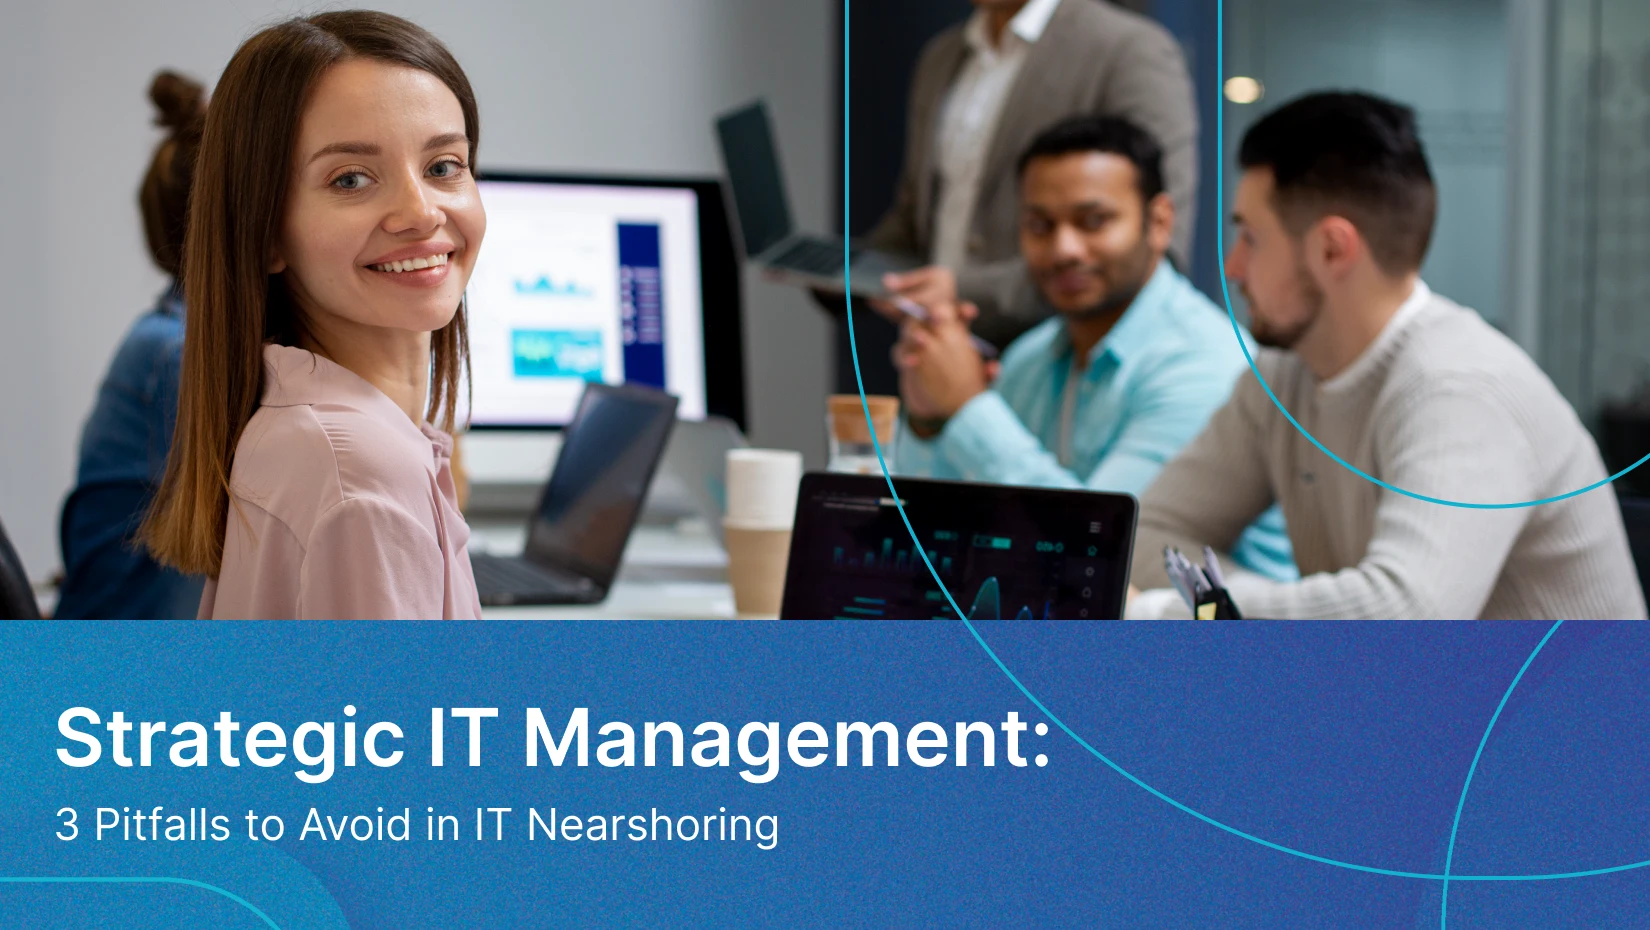 Strategic IT Management: 3 Pitfalls to Avoid in IT Nearshoring